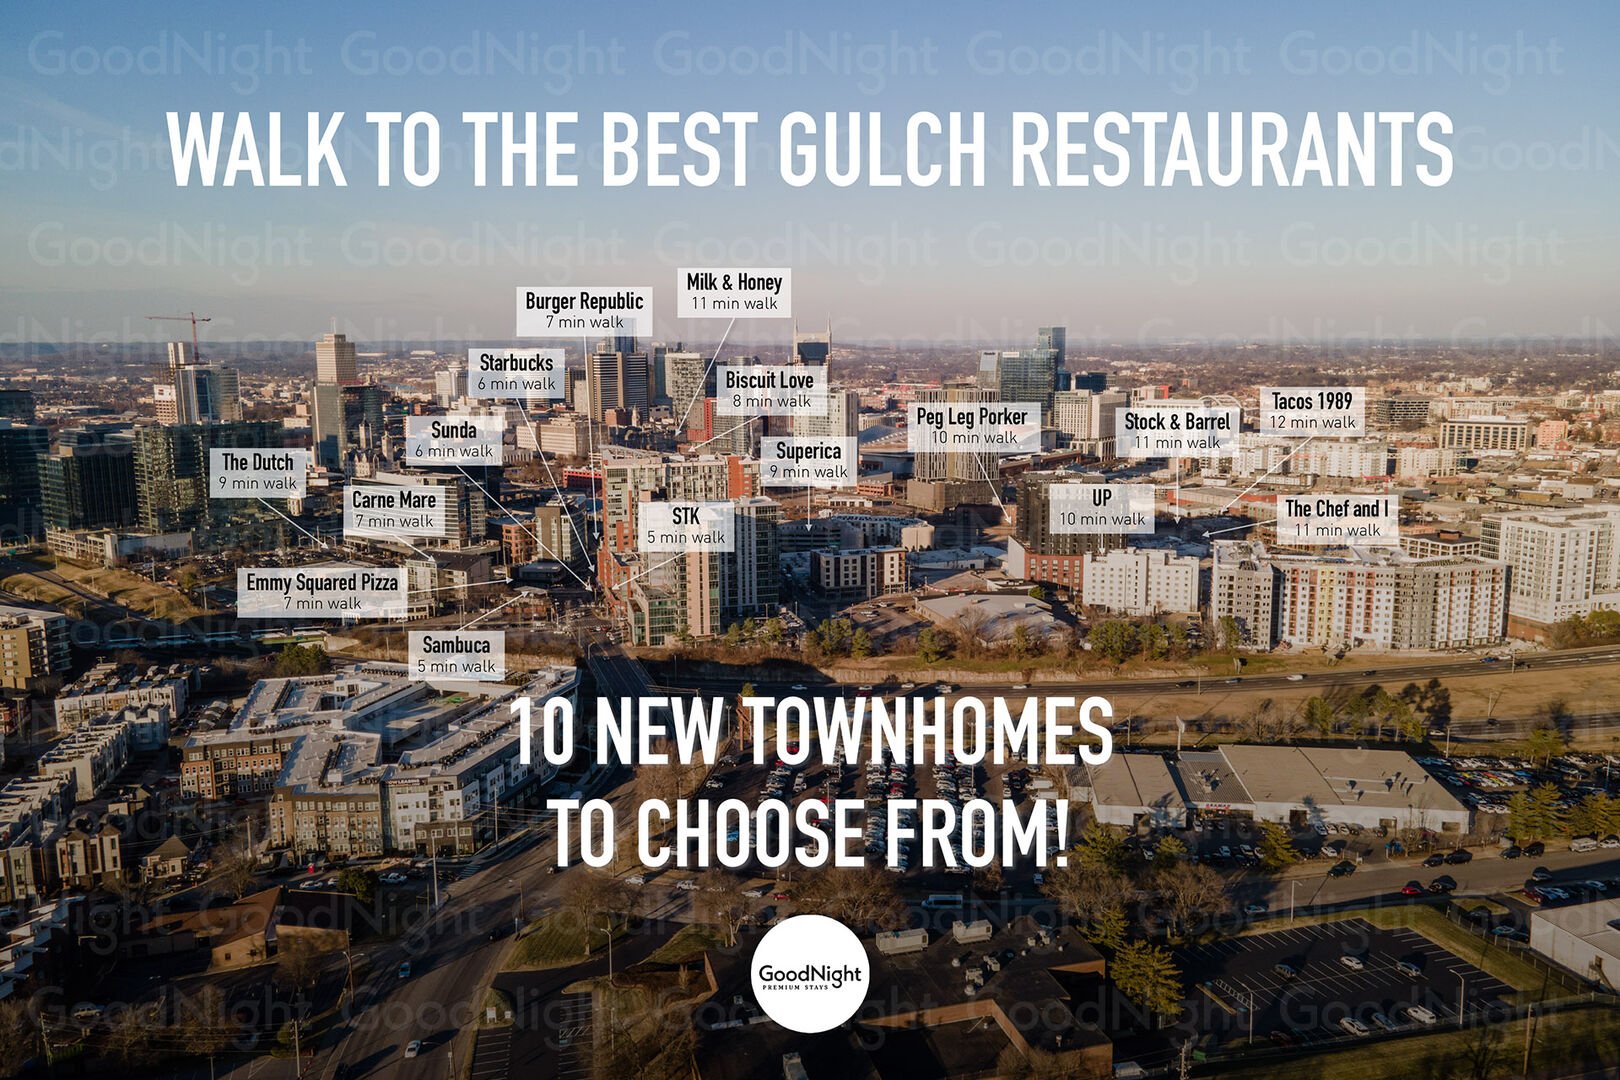 World class restaurants within walking distance (4 mins to Broadway via Uber). Inquire about all our homes in the Gulch!